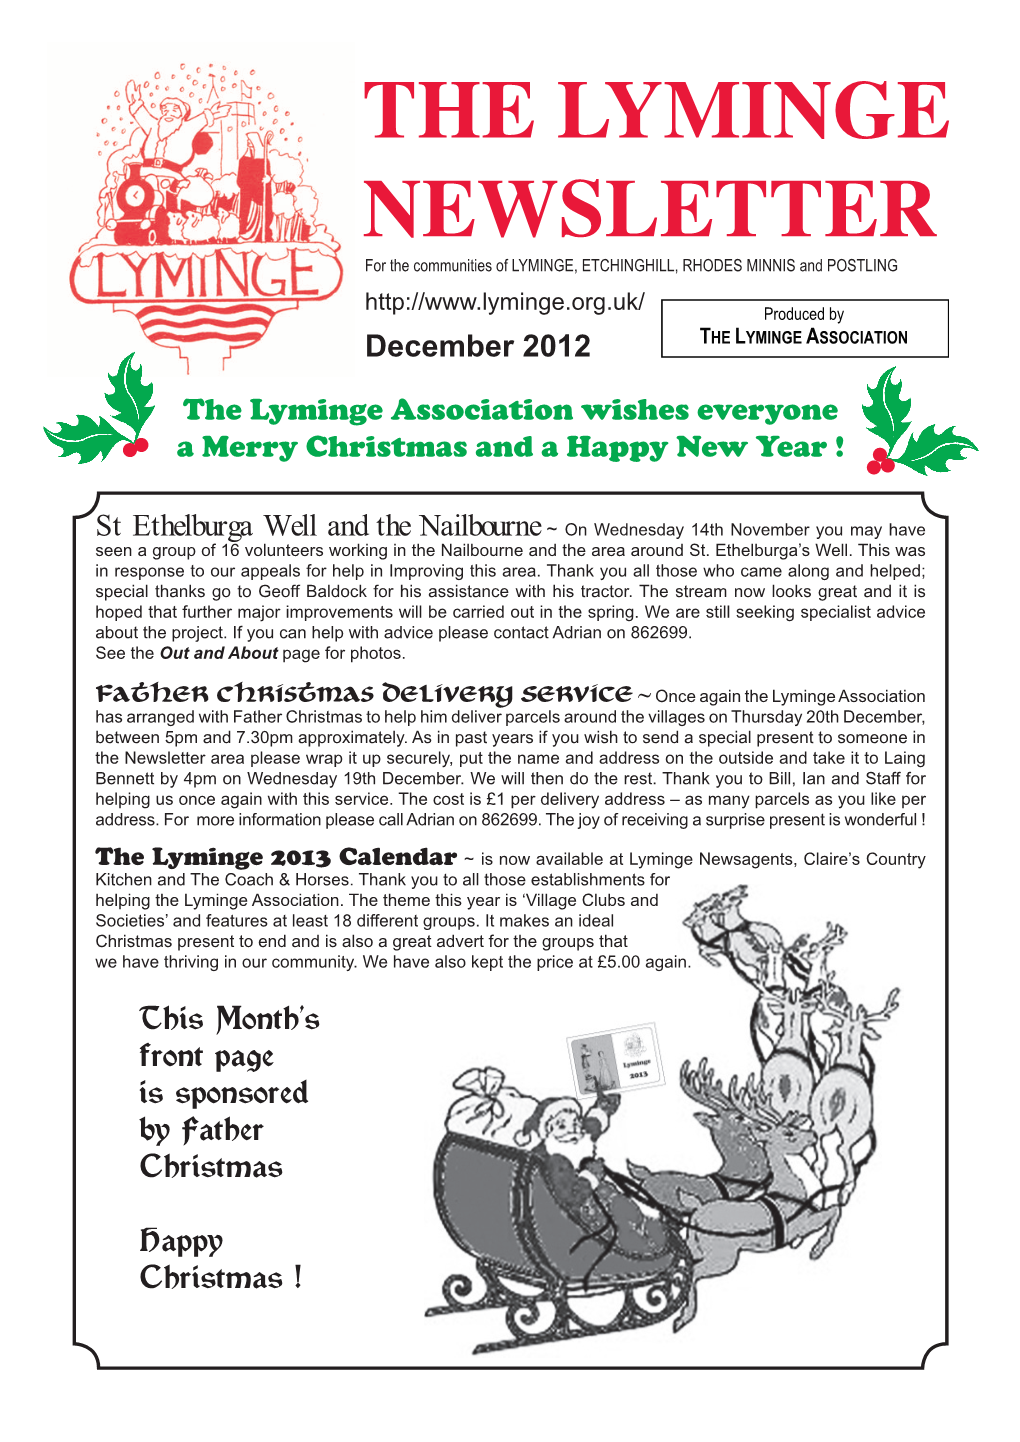 LYMINGE NEWSLETTER for the Communities of LYMINGE, ETCHINGHILL, RHODES MINNIS and POSTLING